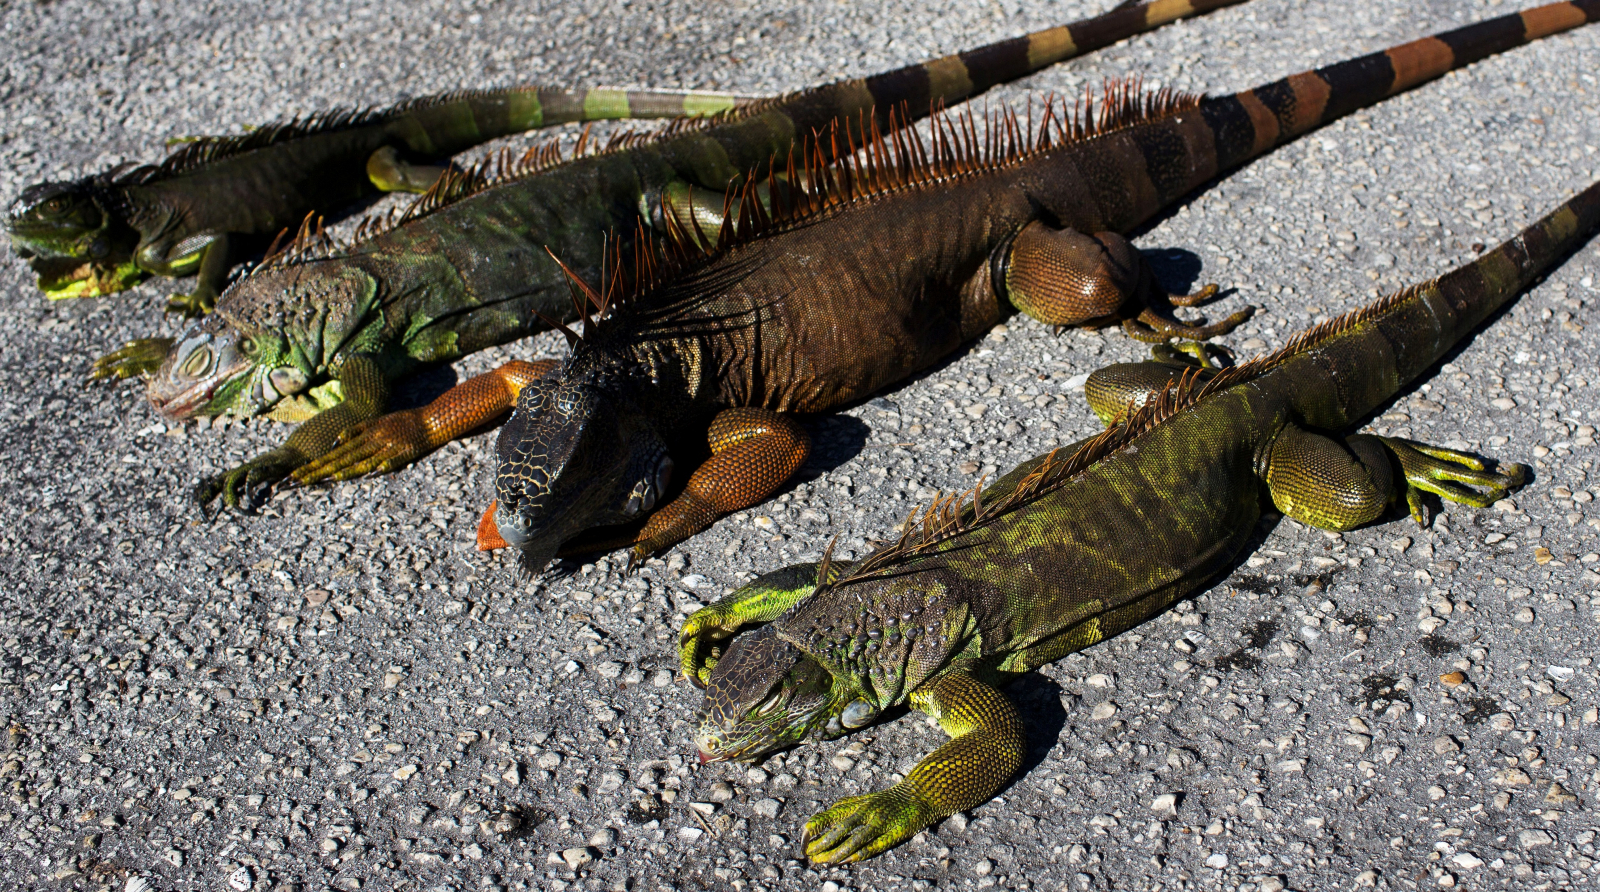 Frozen iguanas falling from trees in Florida due to extreme weather conditions1600 x 892